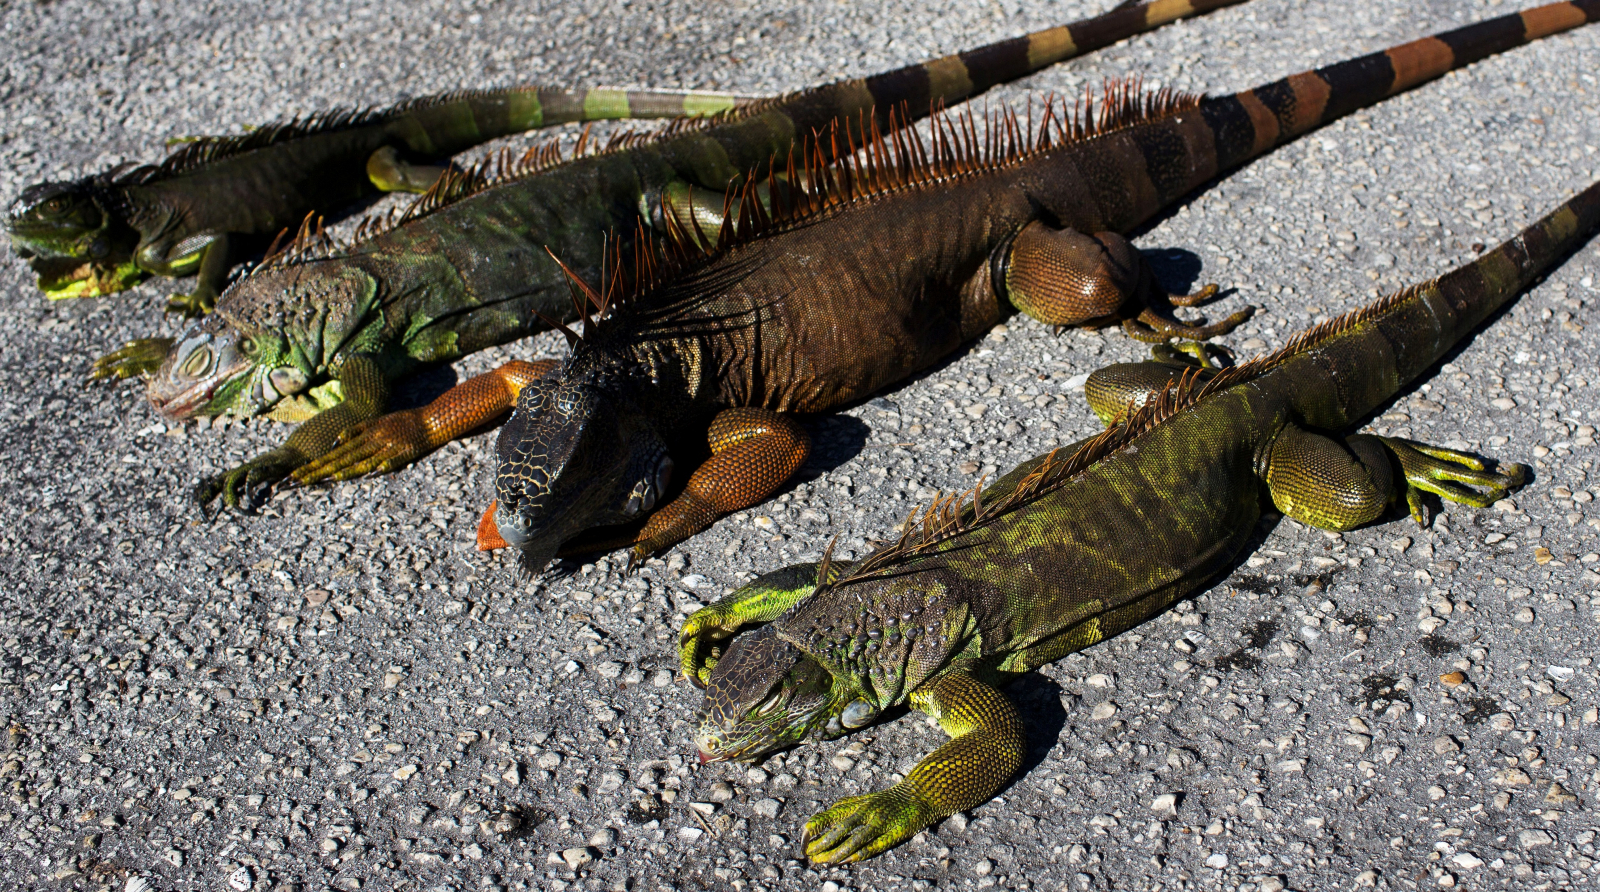 Frozen iguanas falling from trees in Florida due to extreme weather conditions1600 x 892